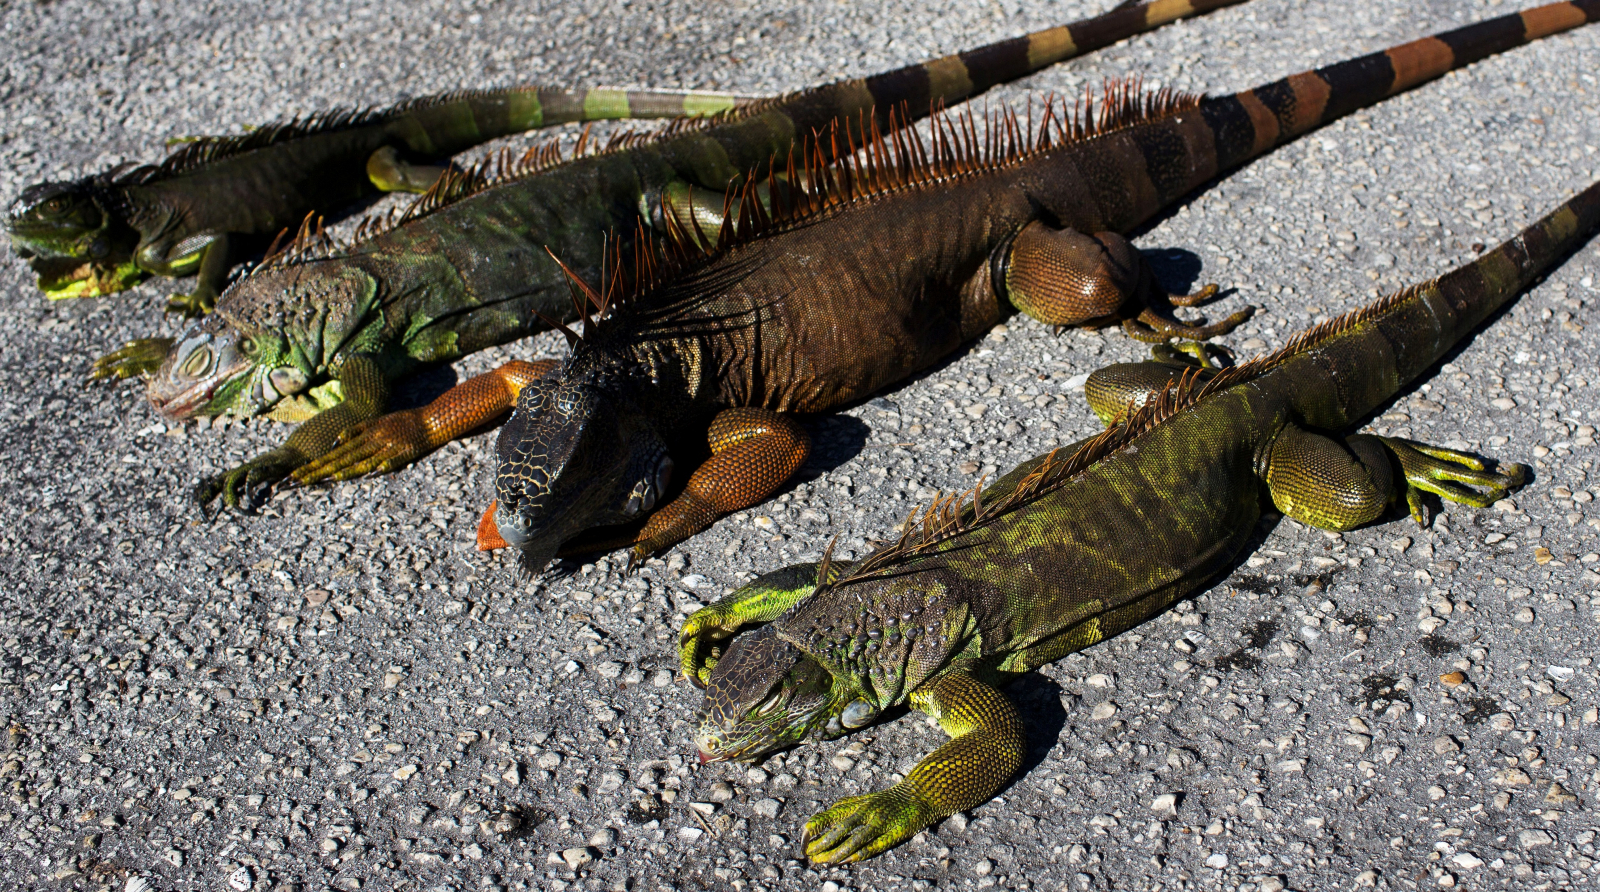 Frozen iguanas falling from trees in Florida due to extreme weather conditions1600 x 892